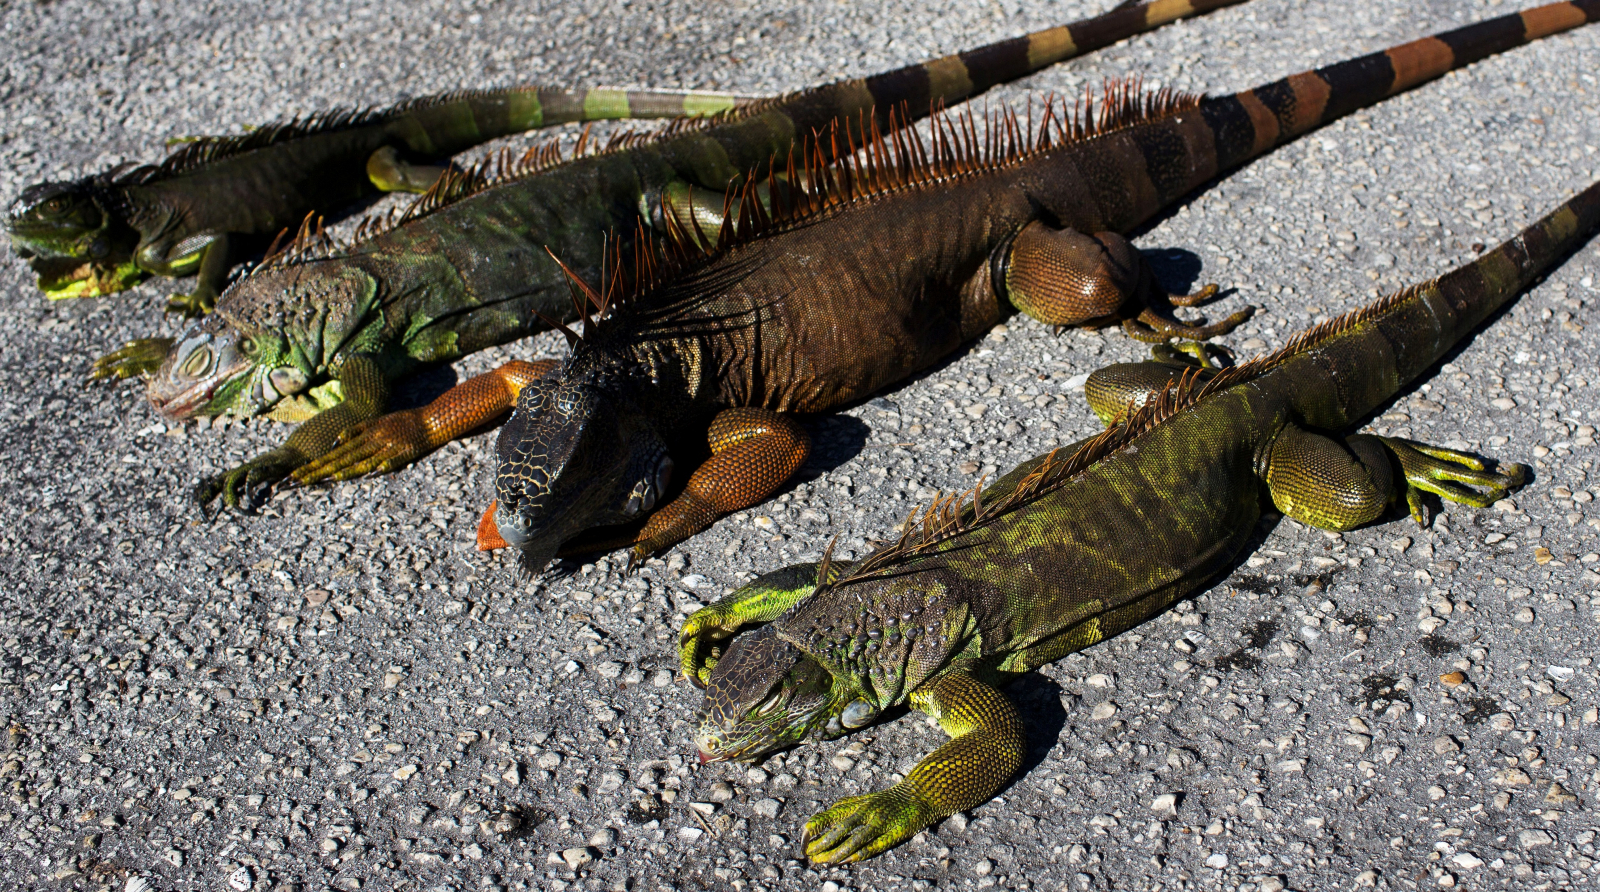 Frozen iguanas falling from trees in Florida due to extreme weather conditions1600 x 892